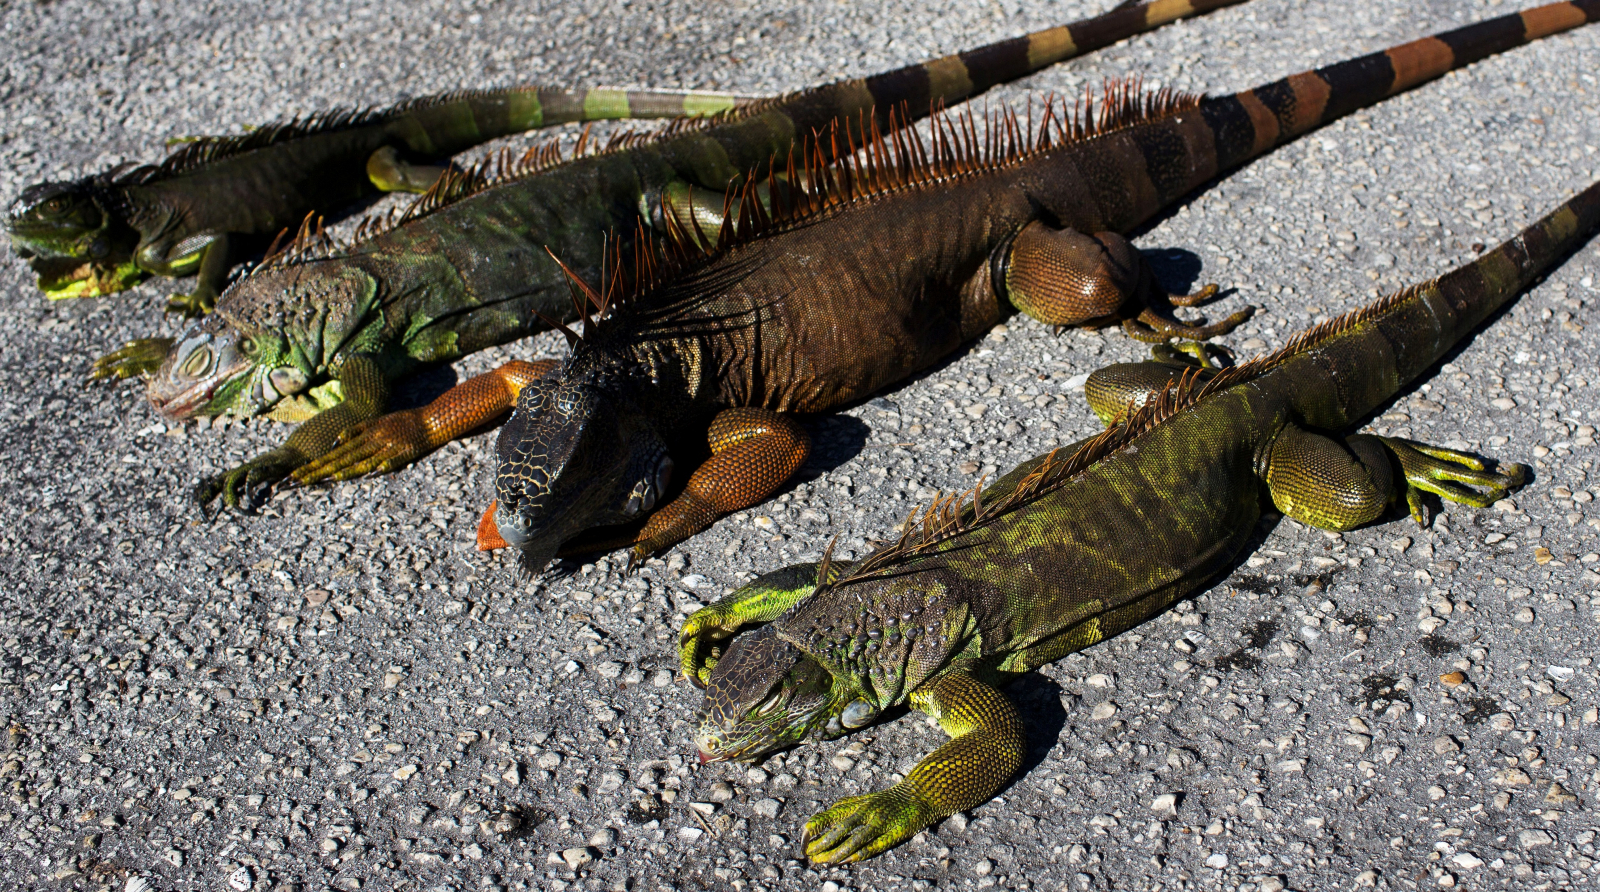 Frozen iguanas falling from trees in Florida due to extreme weather conditions1600 x 892